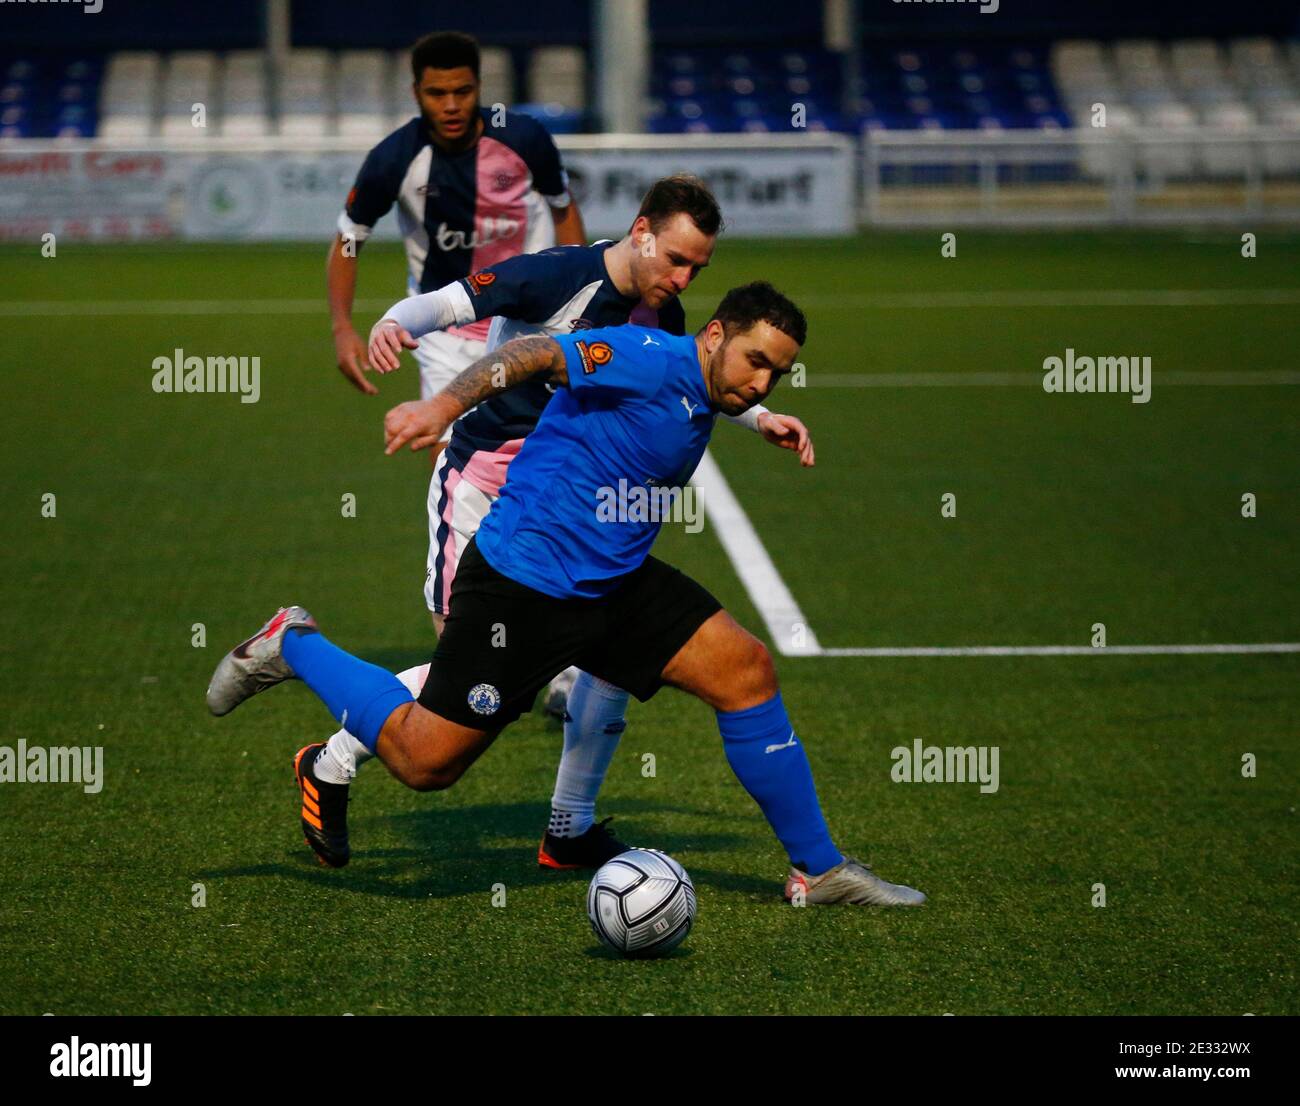 BILLERICAY, United Kingdom, JANUARY 16: Jai Reason of Billericay Town during Vanarama National League - South between Billericay Town and of Dulwich Hamlet at New Lodge, Billericay on 16th January, 2021 Credit: Action Foto Sport/Alamy Live News Stock Photo